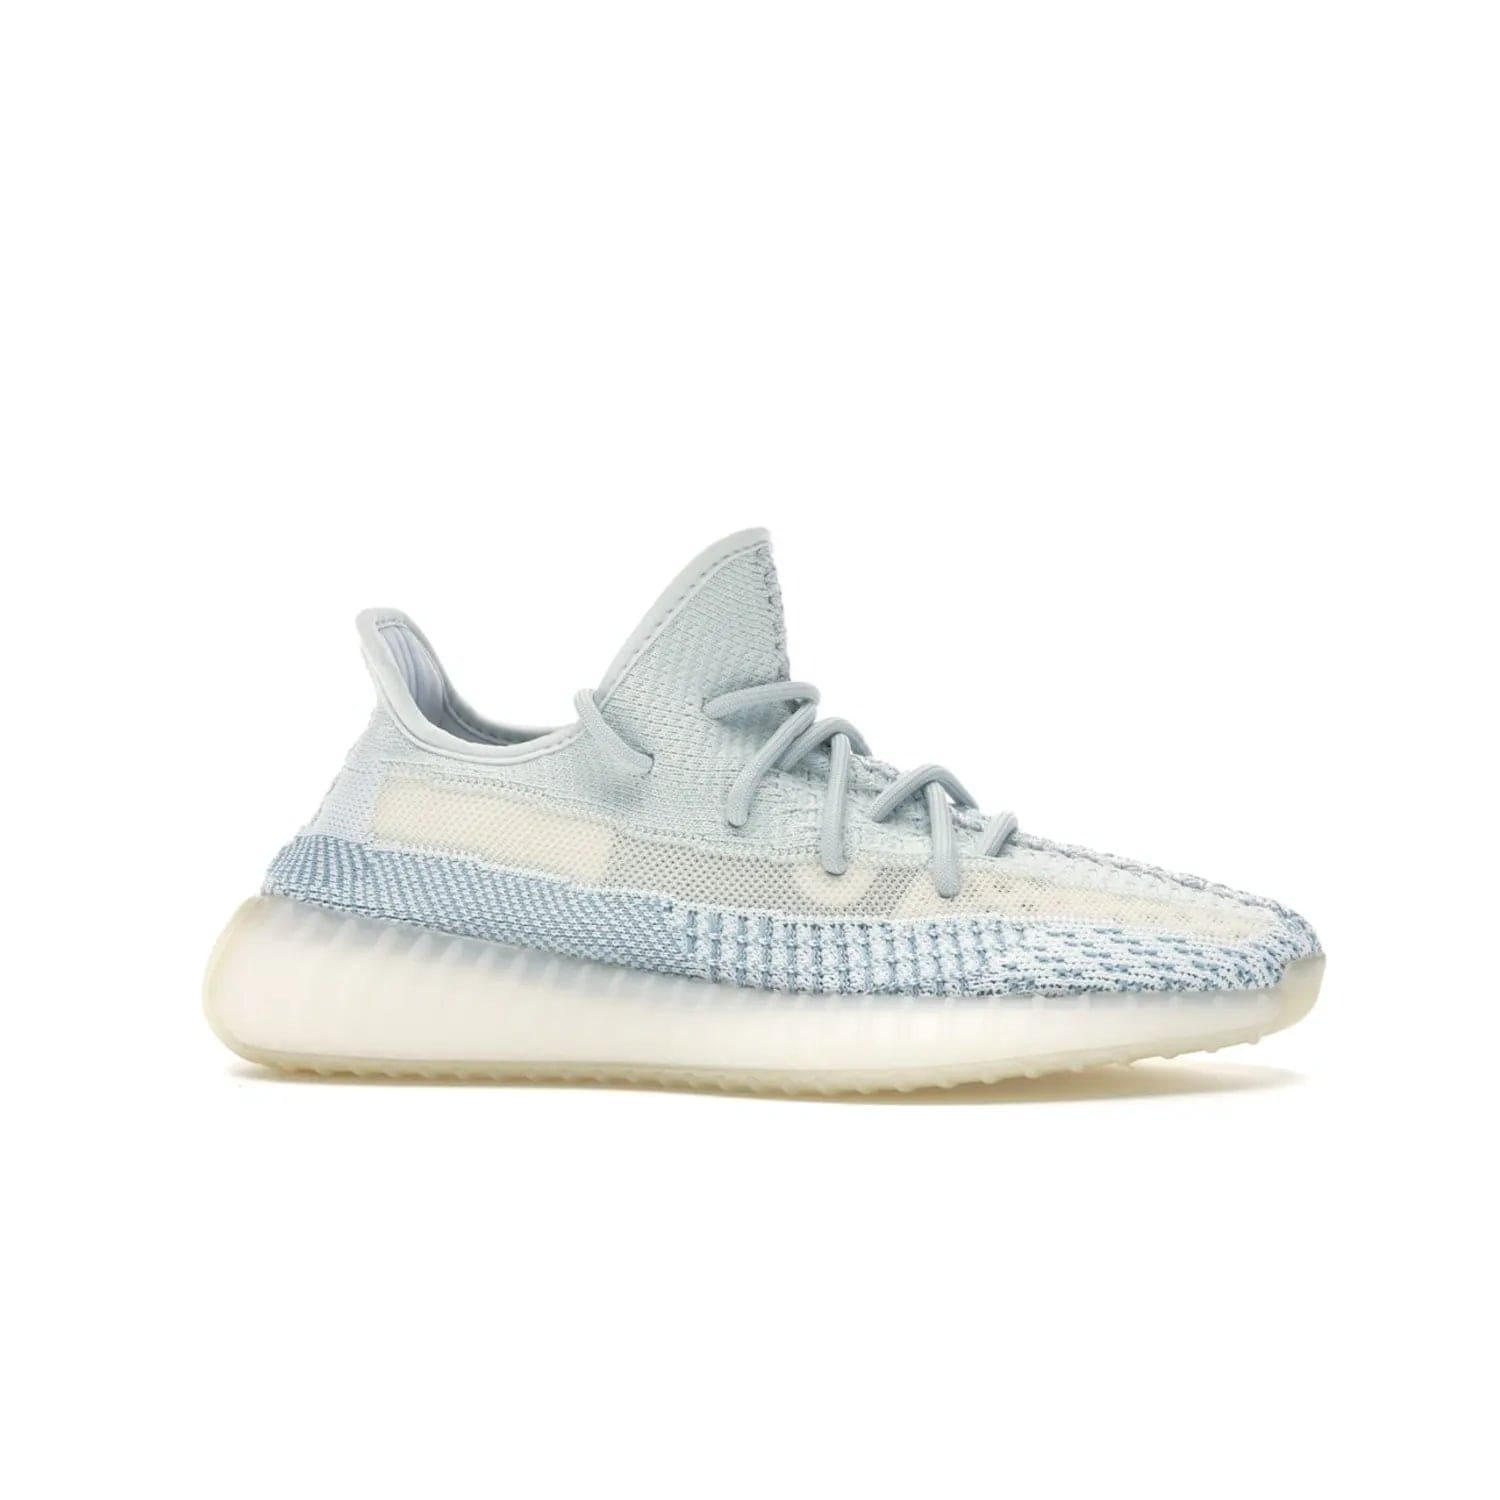 adidas Yeezy Boost 350 V2 Cloud White (Non-Reflective) - Image 2 - Only at www.BallersClubKickz.com - Uniquely designed adidas Yeezy Boost 350 V2 Cloud White (Non-Reflective) with a Primeknit upper in shades of cream and blue with a contrasting hard sole. A fashion-forward sneaker with a transparent strip and blue-and-white patterns.